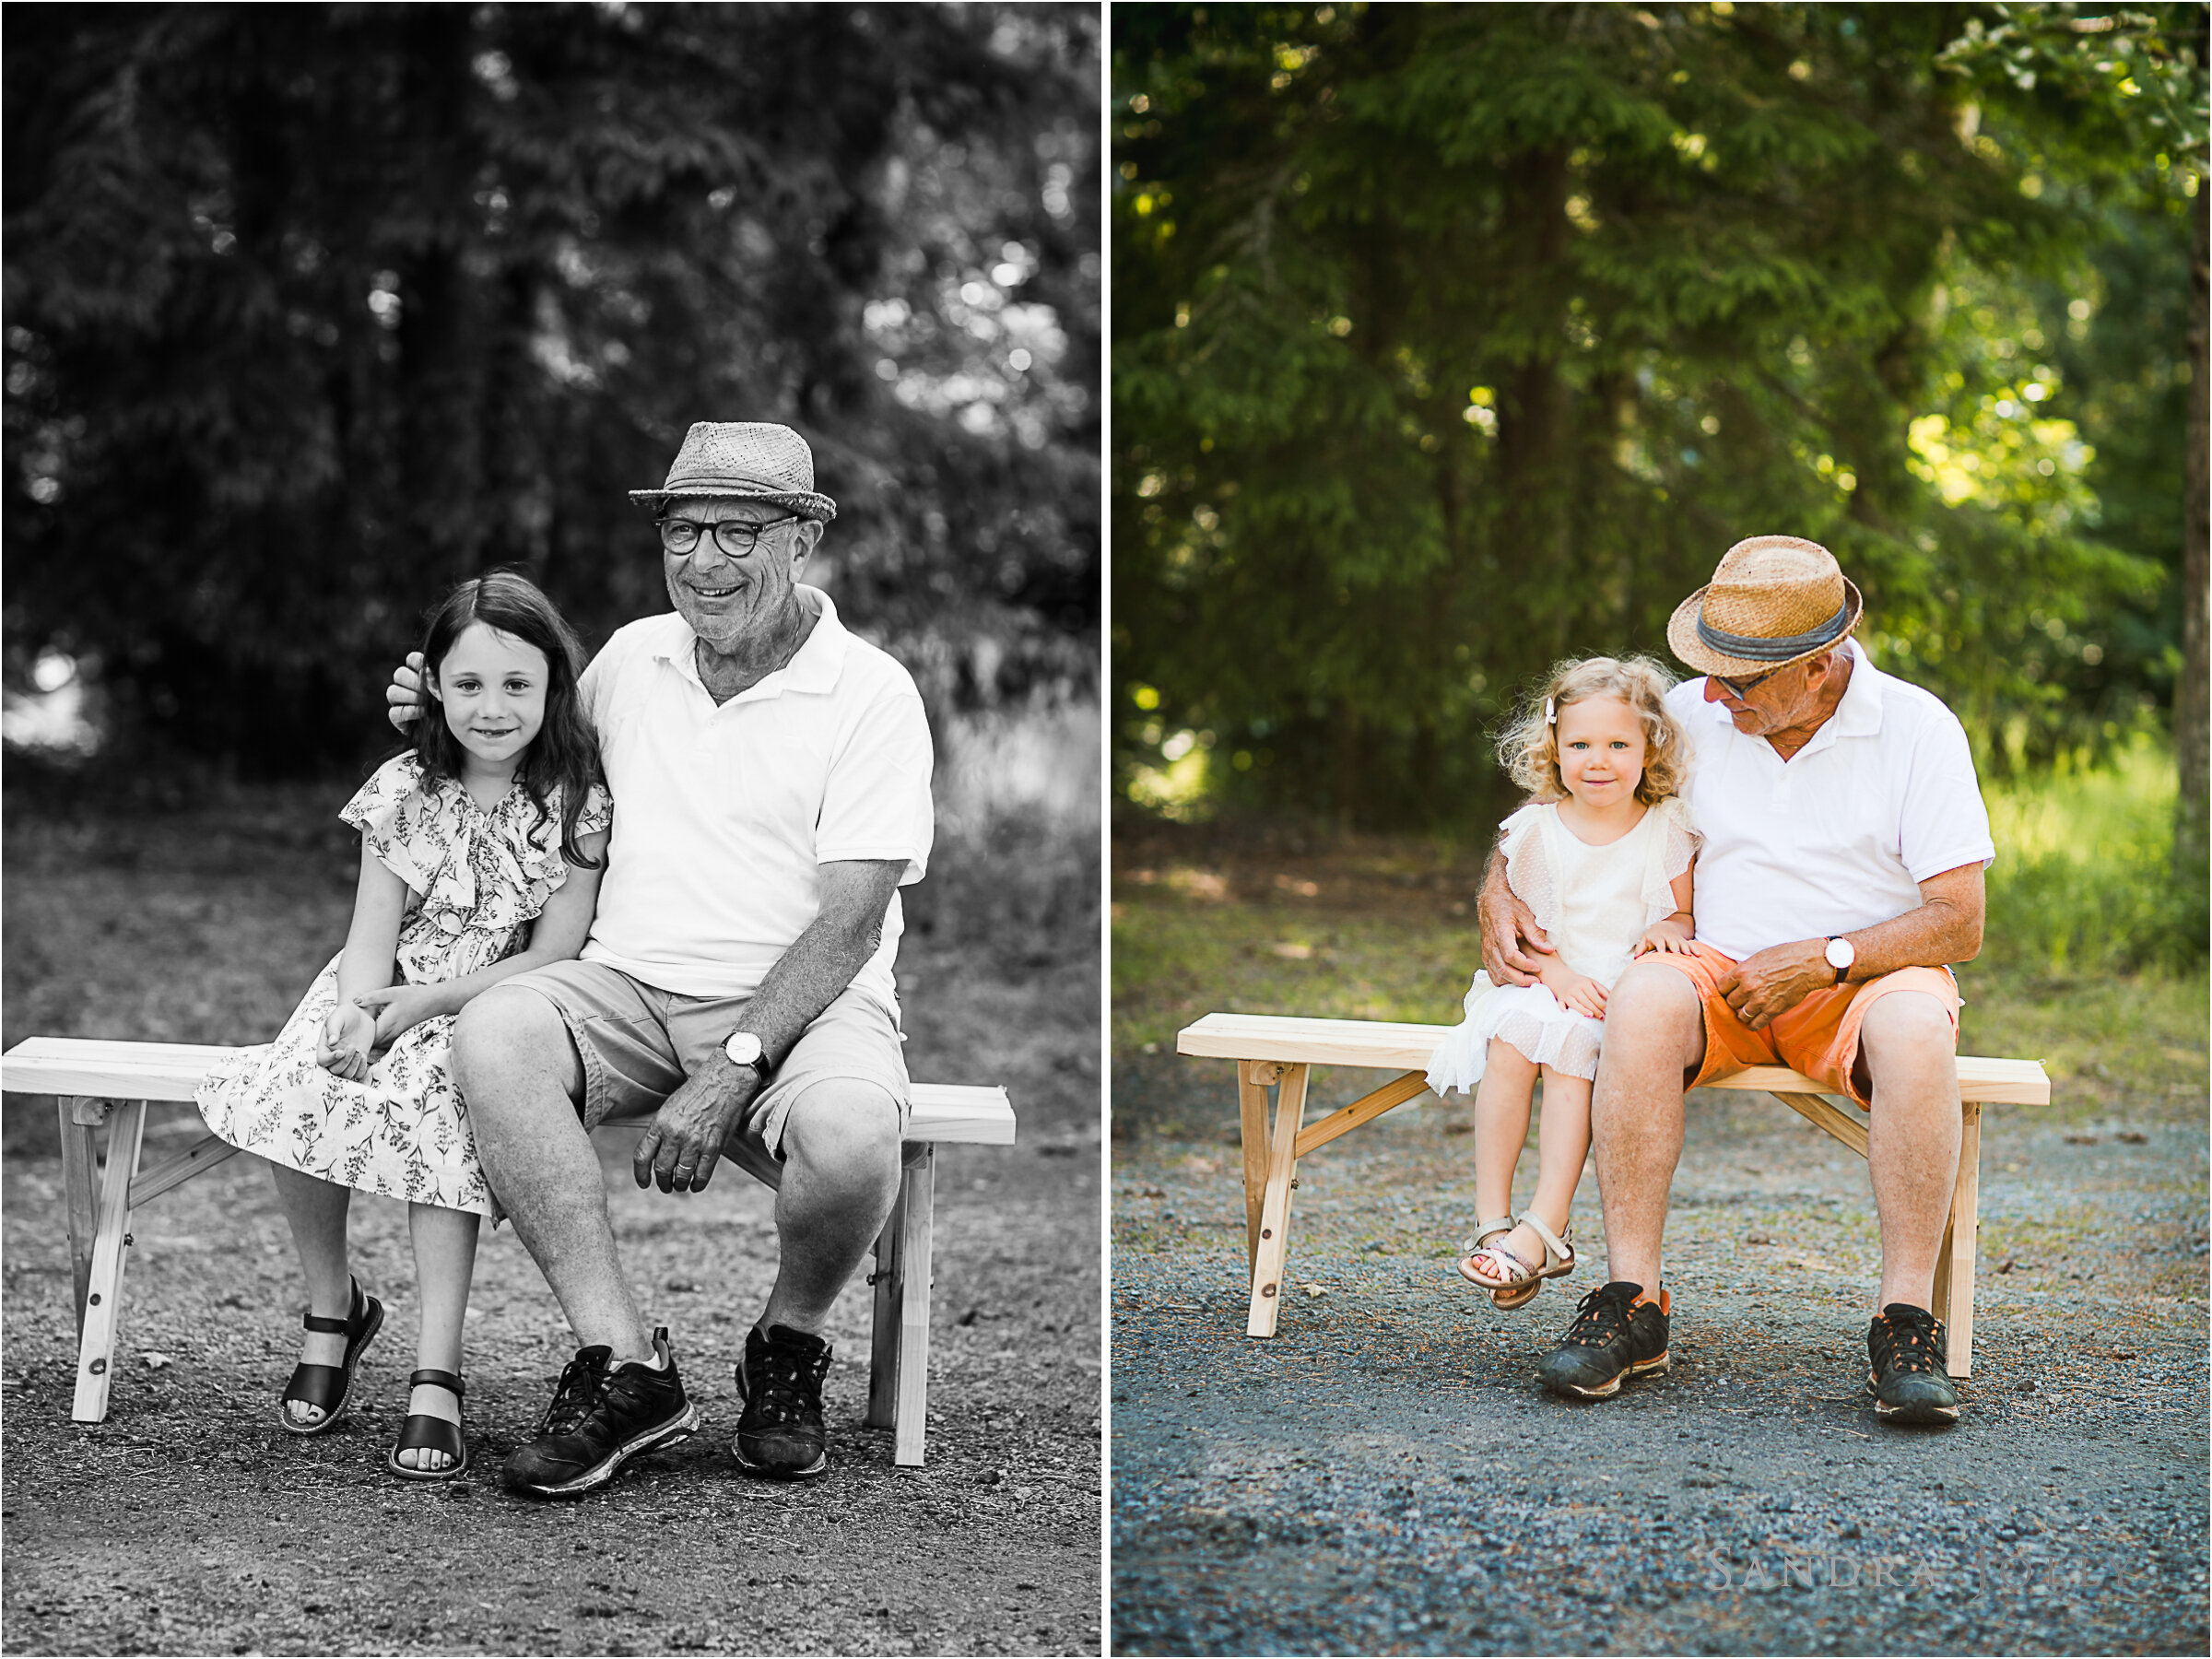 photos-of-a-grandfather-with-his-grandchildren-by-sandra-jolly.jpg